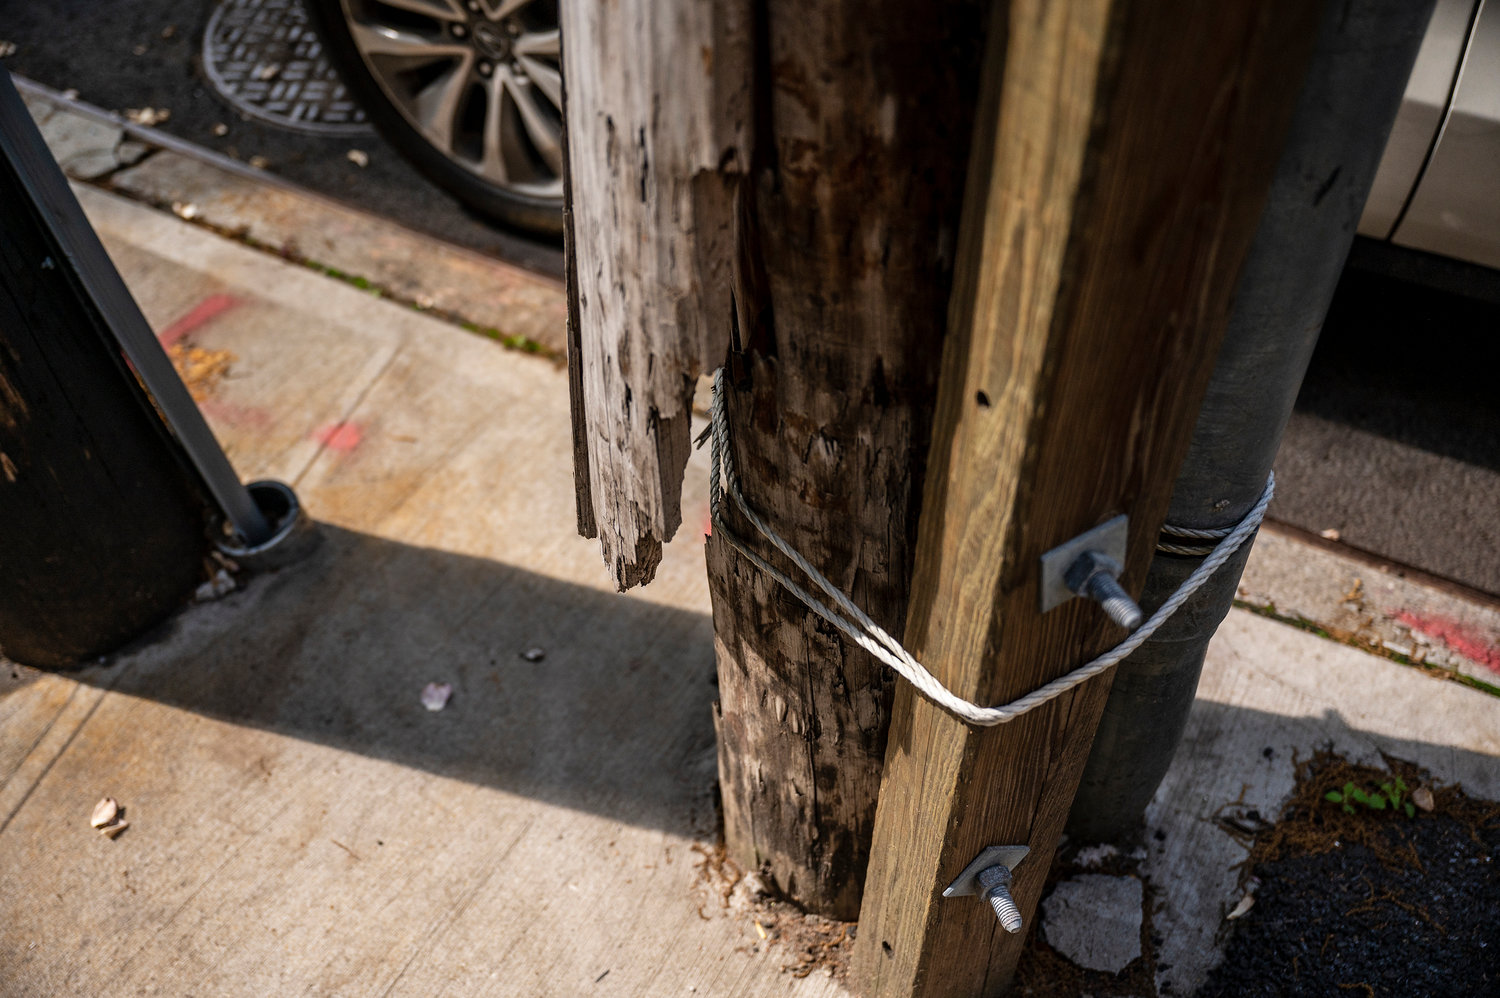 On Sedgwick Avenue there is a broken utility pole that is held in place with screws. Wood and rope were placed by Con Edison in a temporary fashion to prevent immediate danger for the neighborhood.